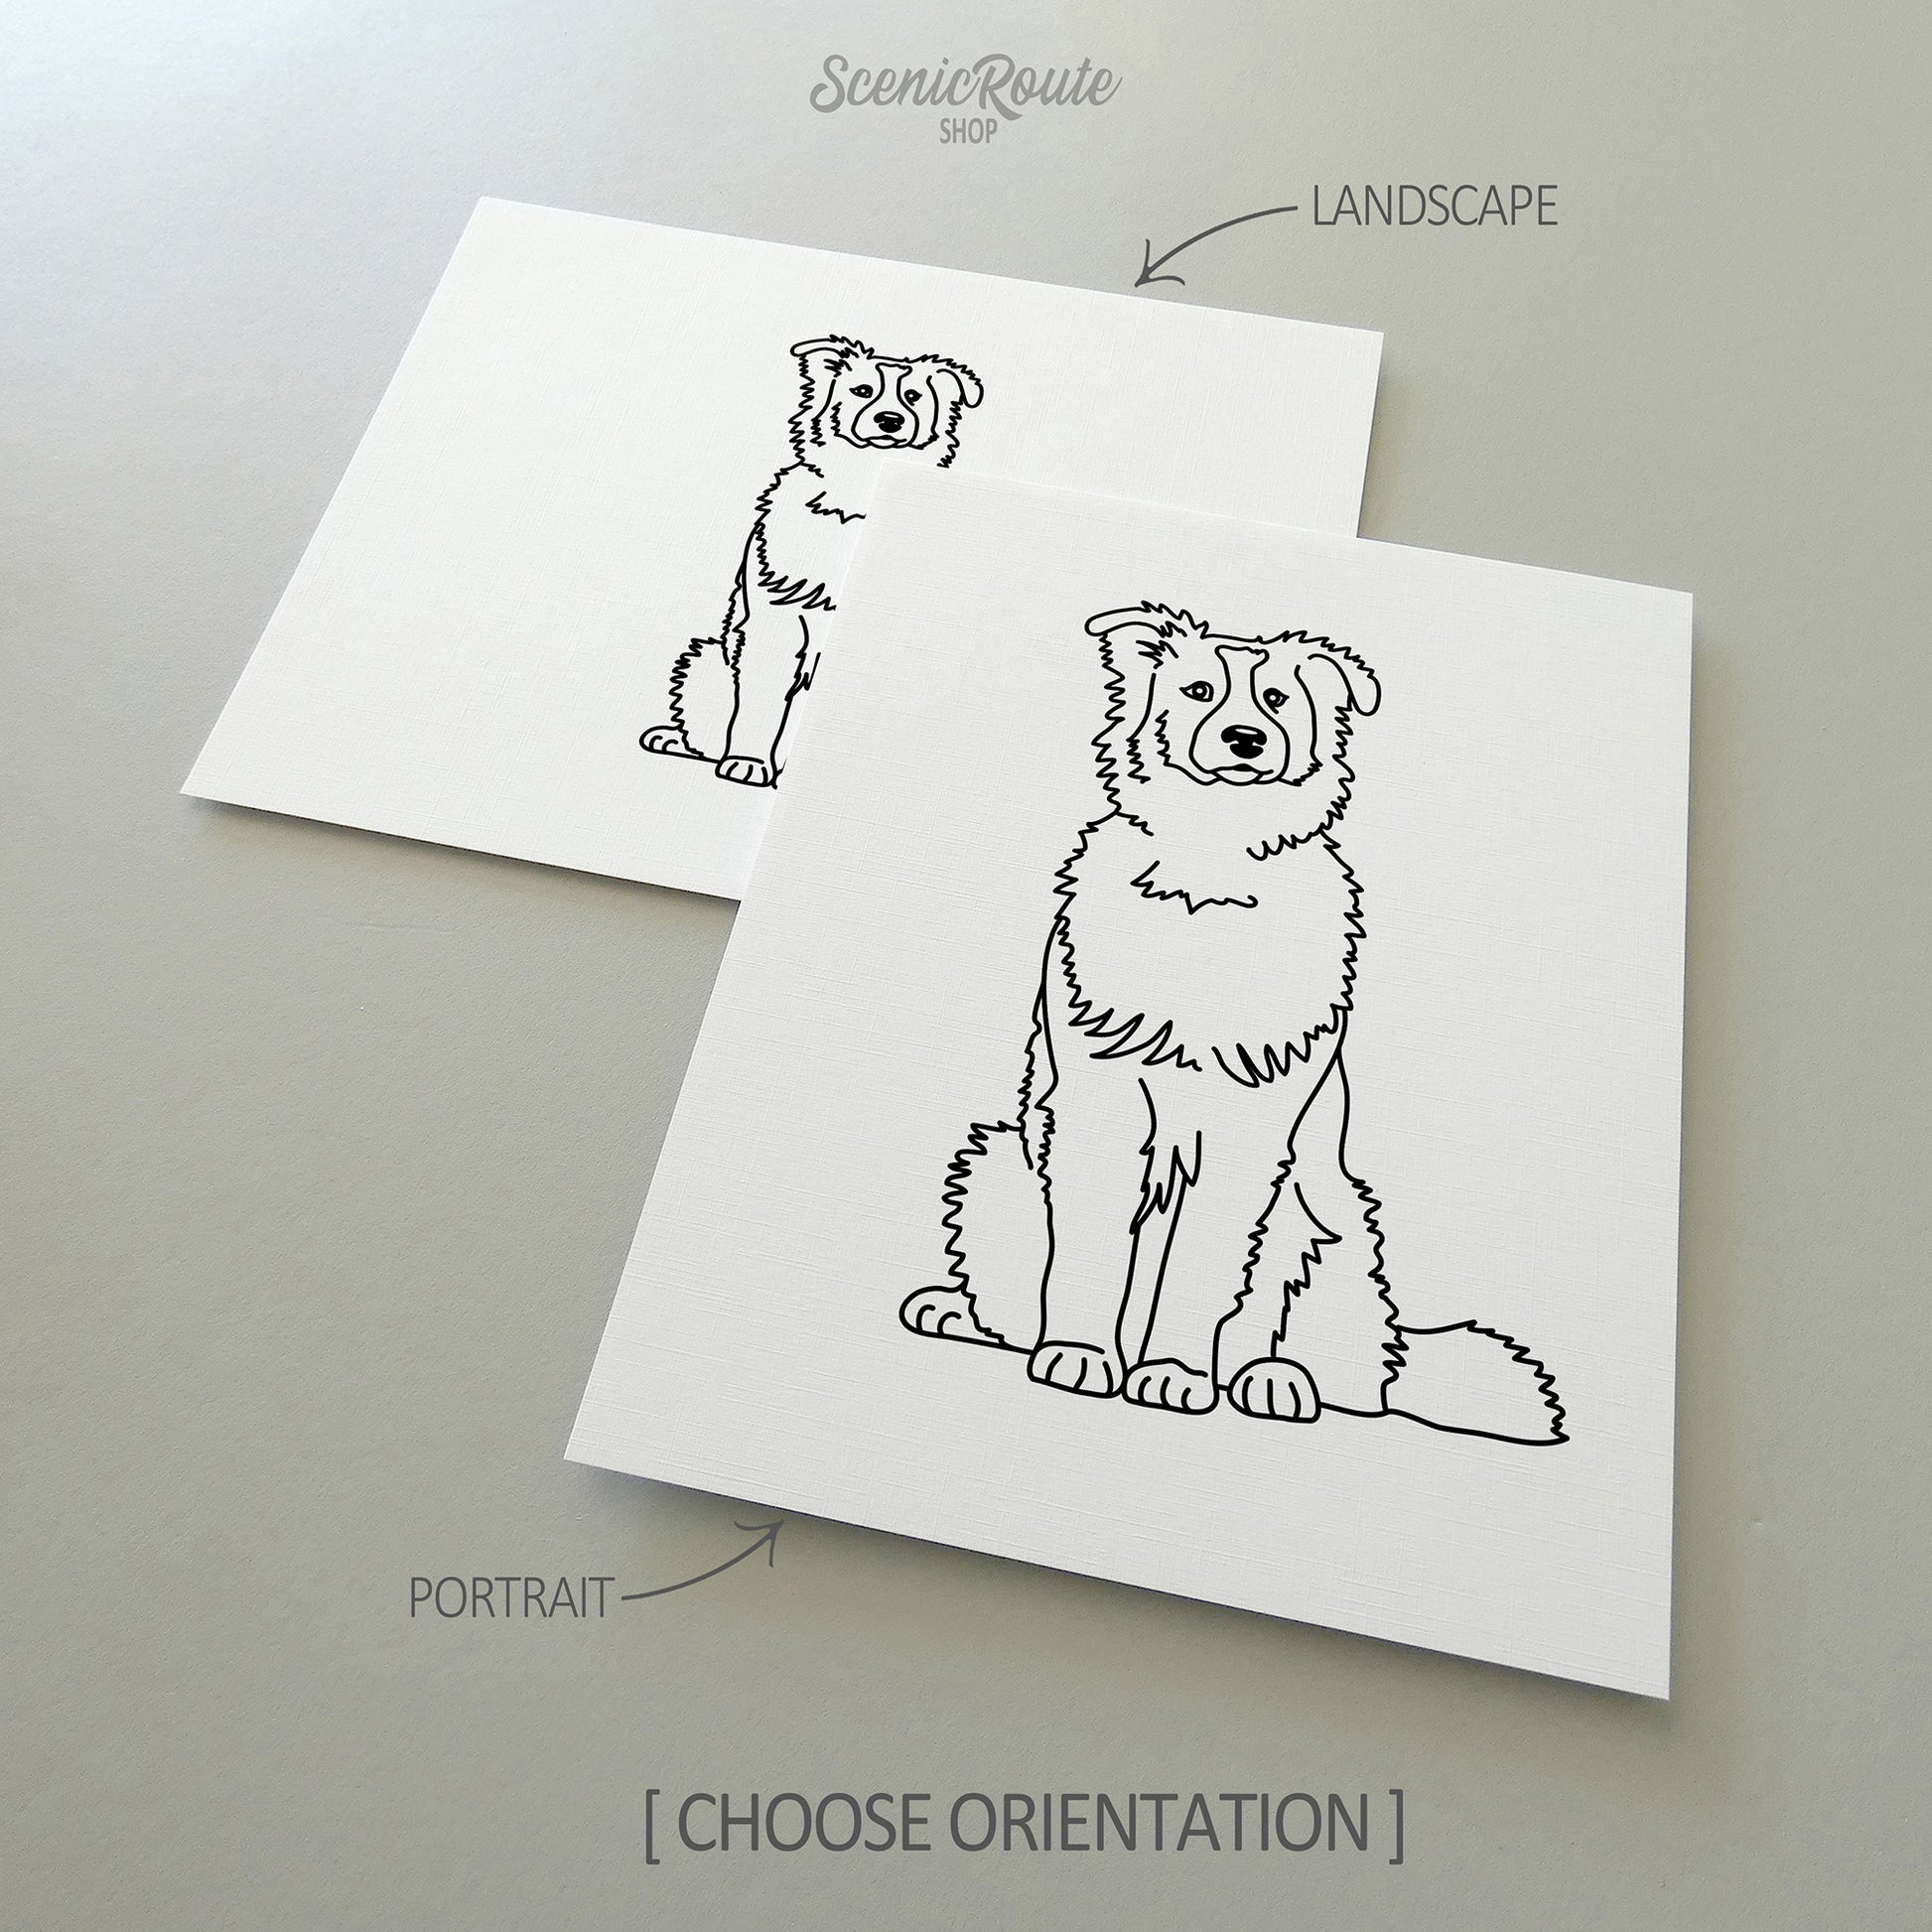 Two drawings of an Australian Shepherd dog on white linen paper with a gray background.  Pieces are shown in portrait and landscape orientation options to illustrate the available art print options.